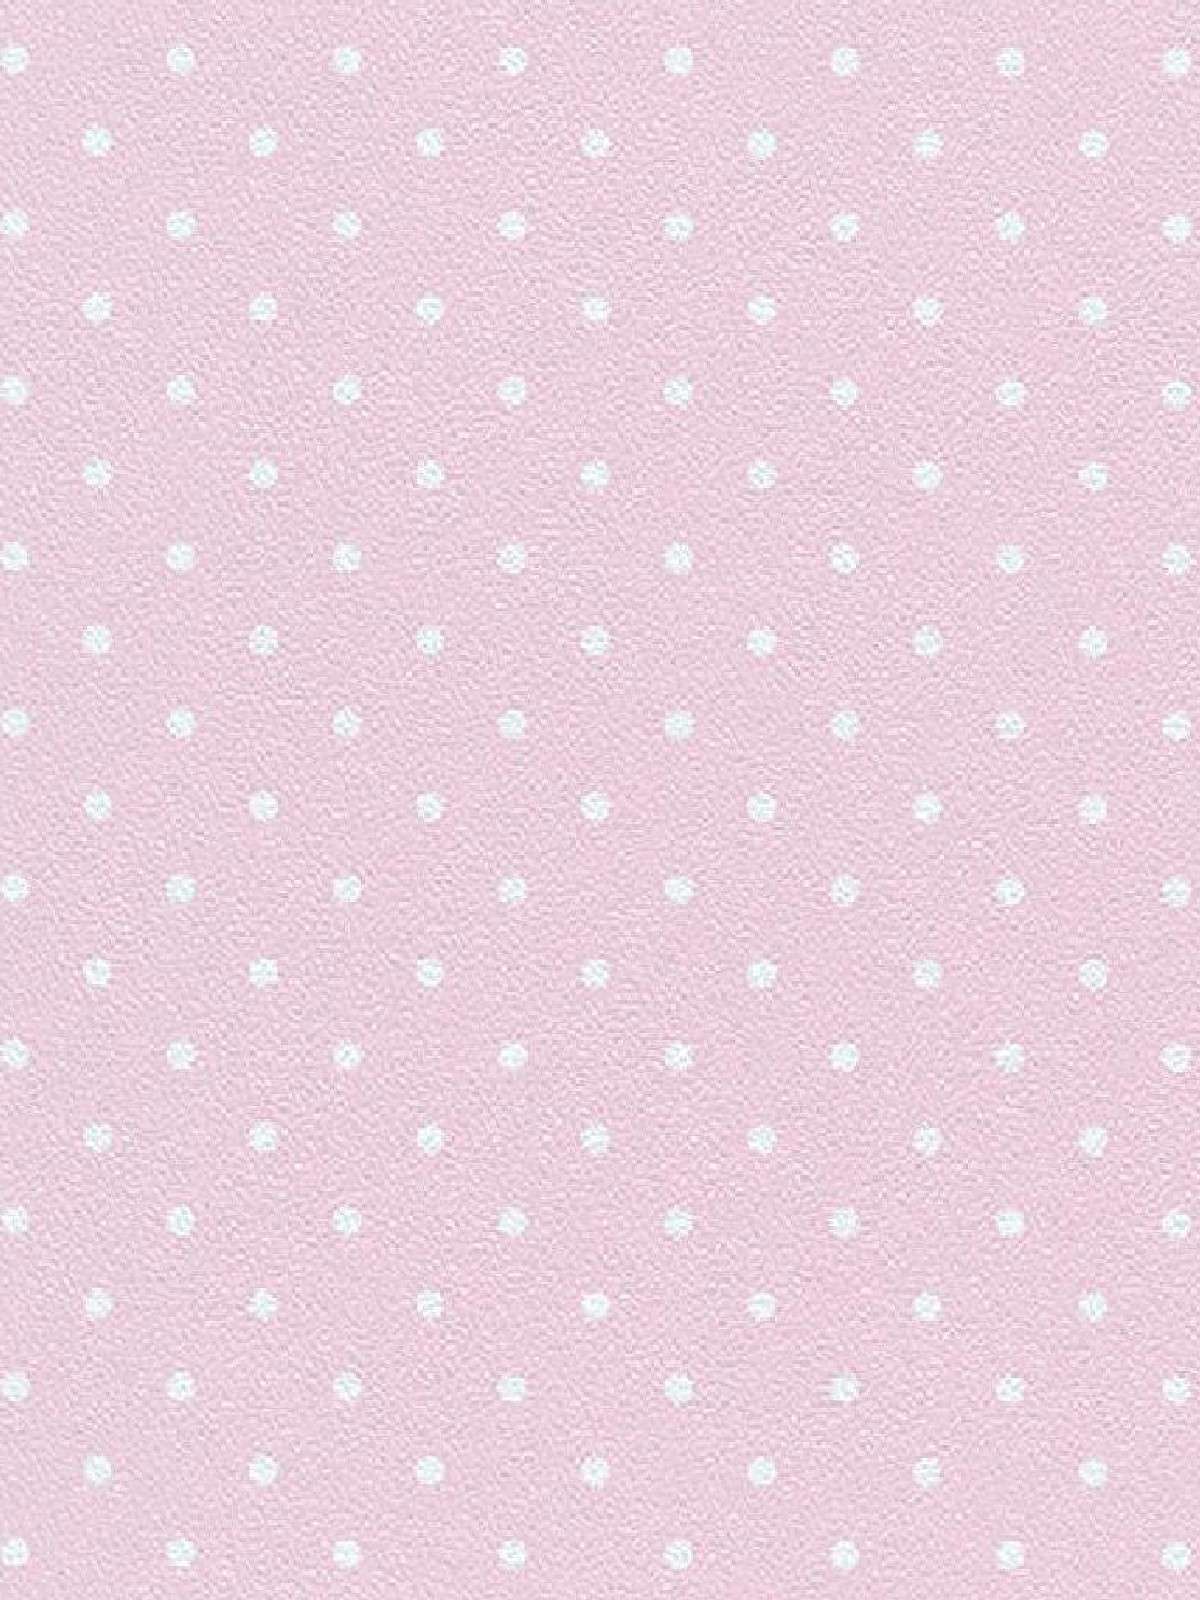 Baby Pink Wallpaper High Definition